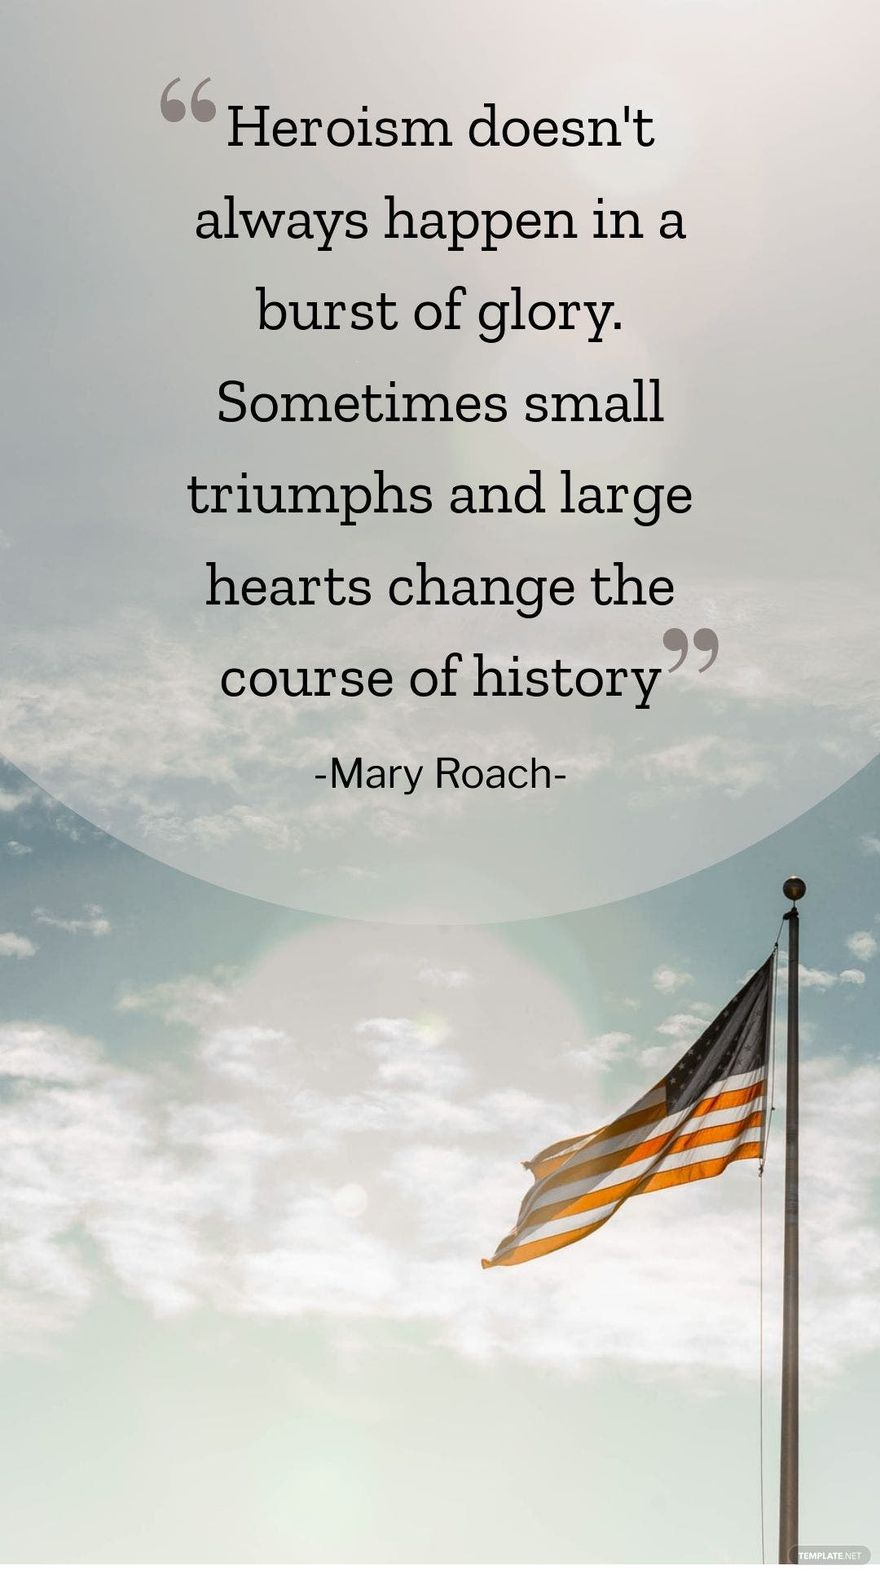 Mary Roach - Heroism doesn't always happen in a burst of glory. Sometimes small triumphs and large hearts change the course of history